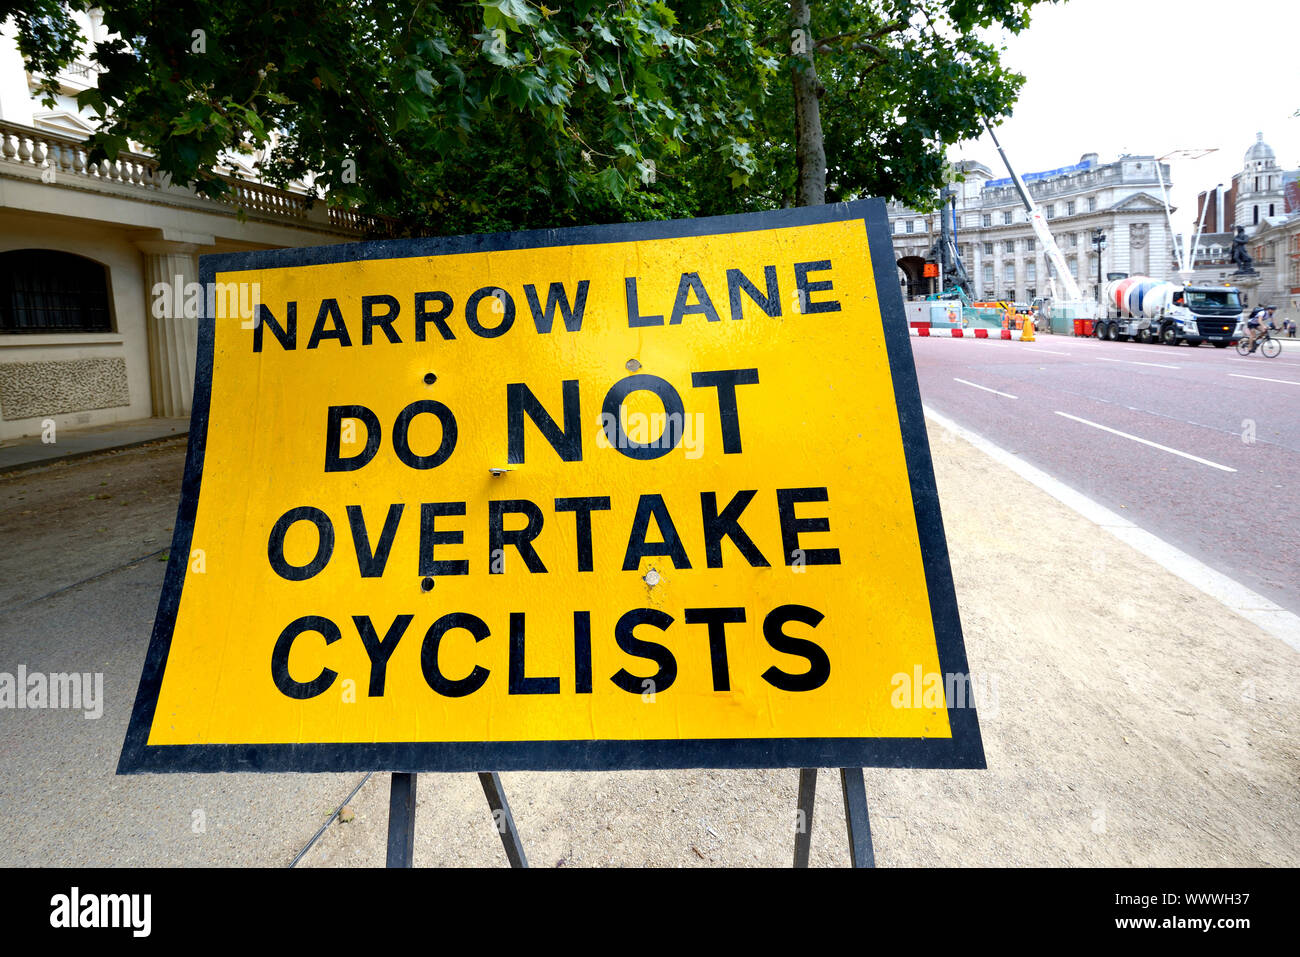 London, England, UK. Traffic sign in the Mall - Do Not Overtake Cyclists Stock Photo